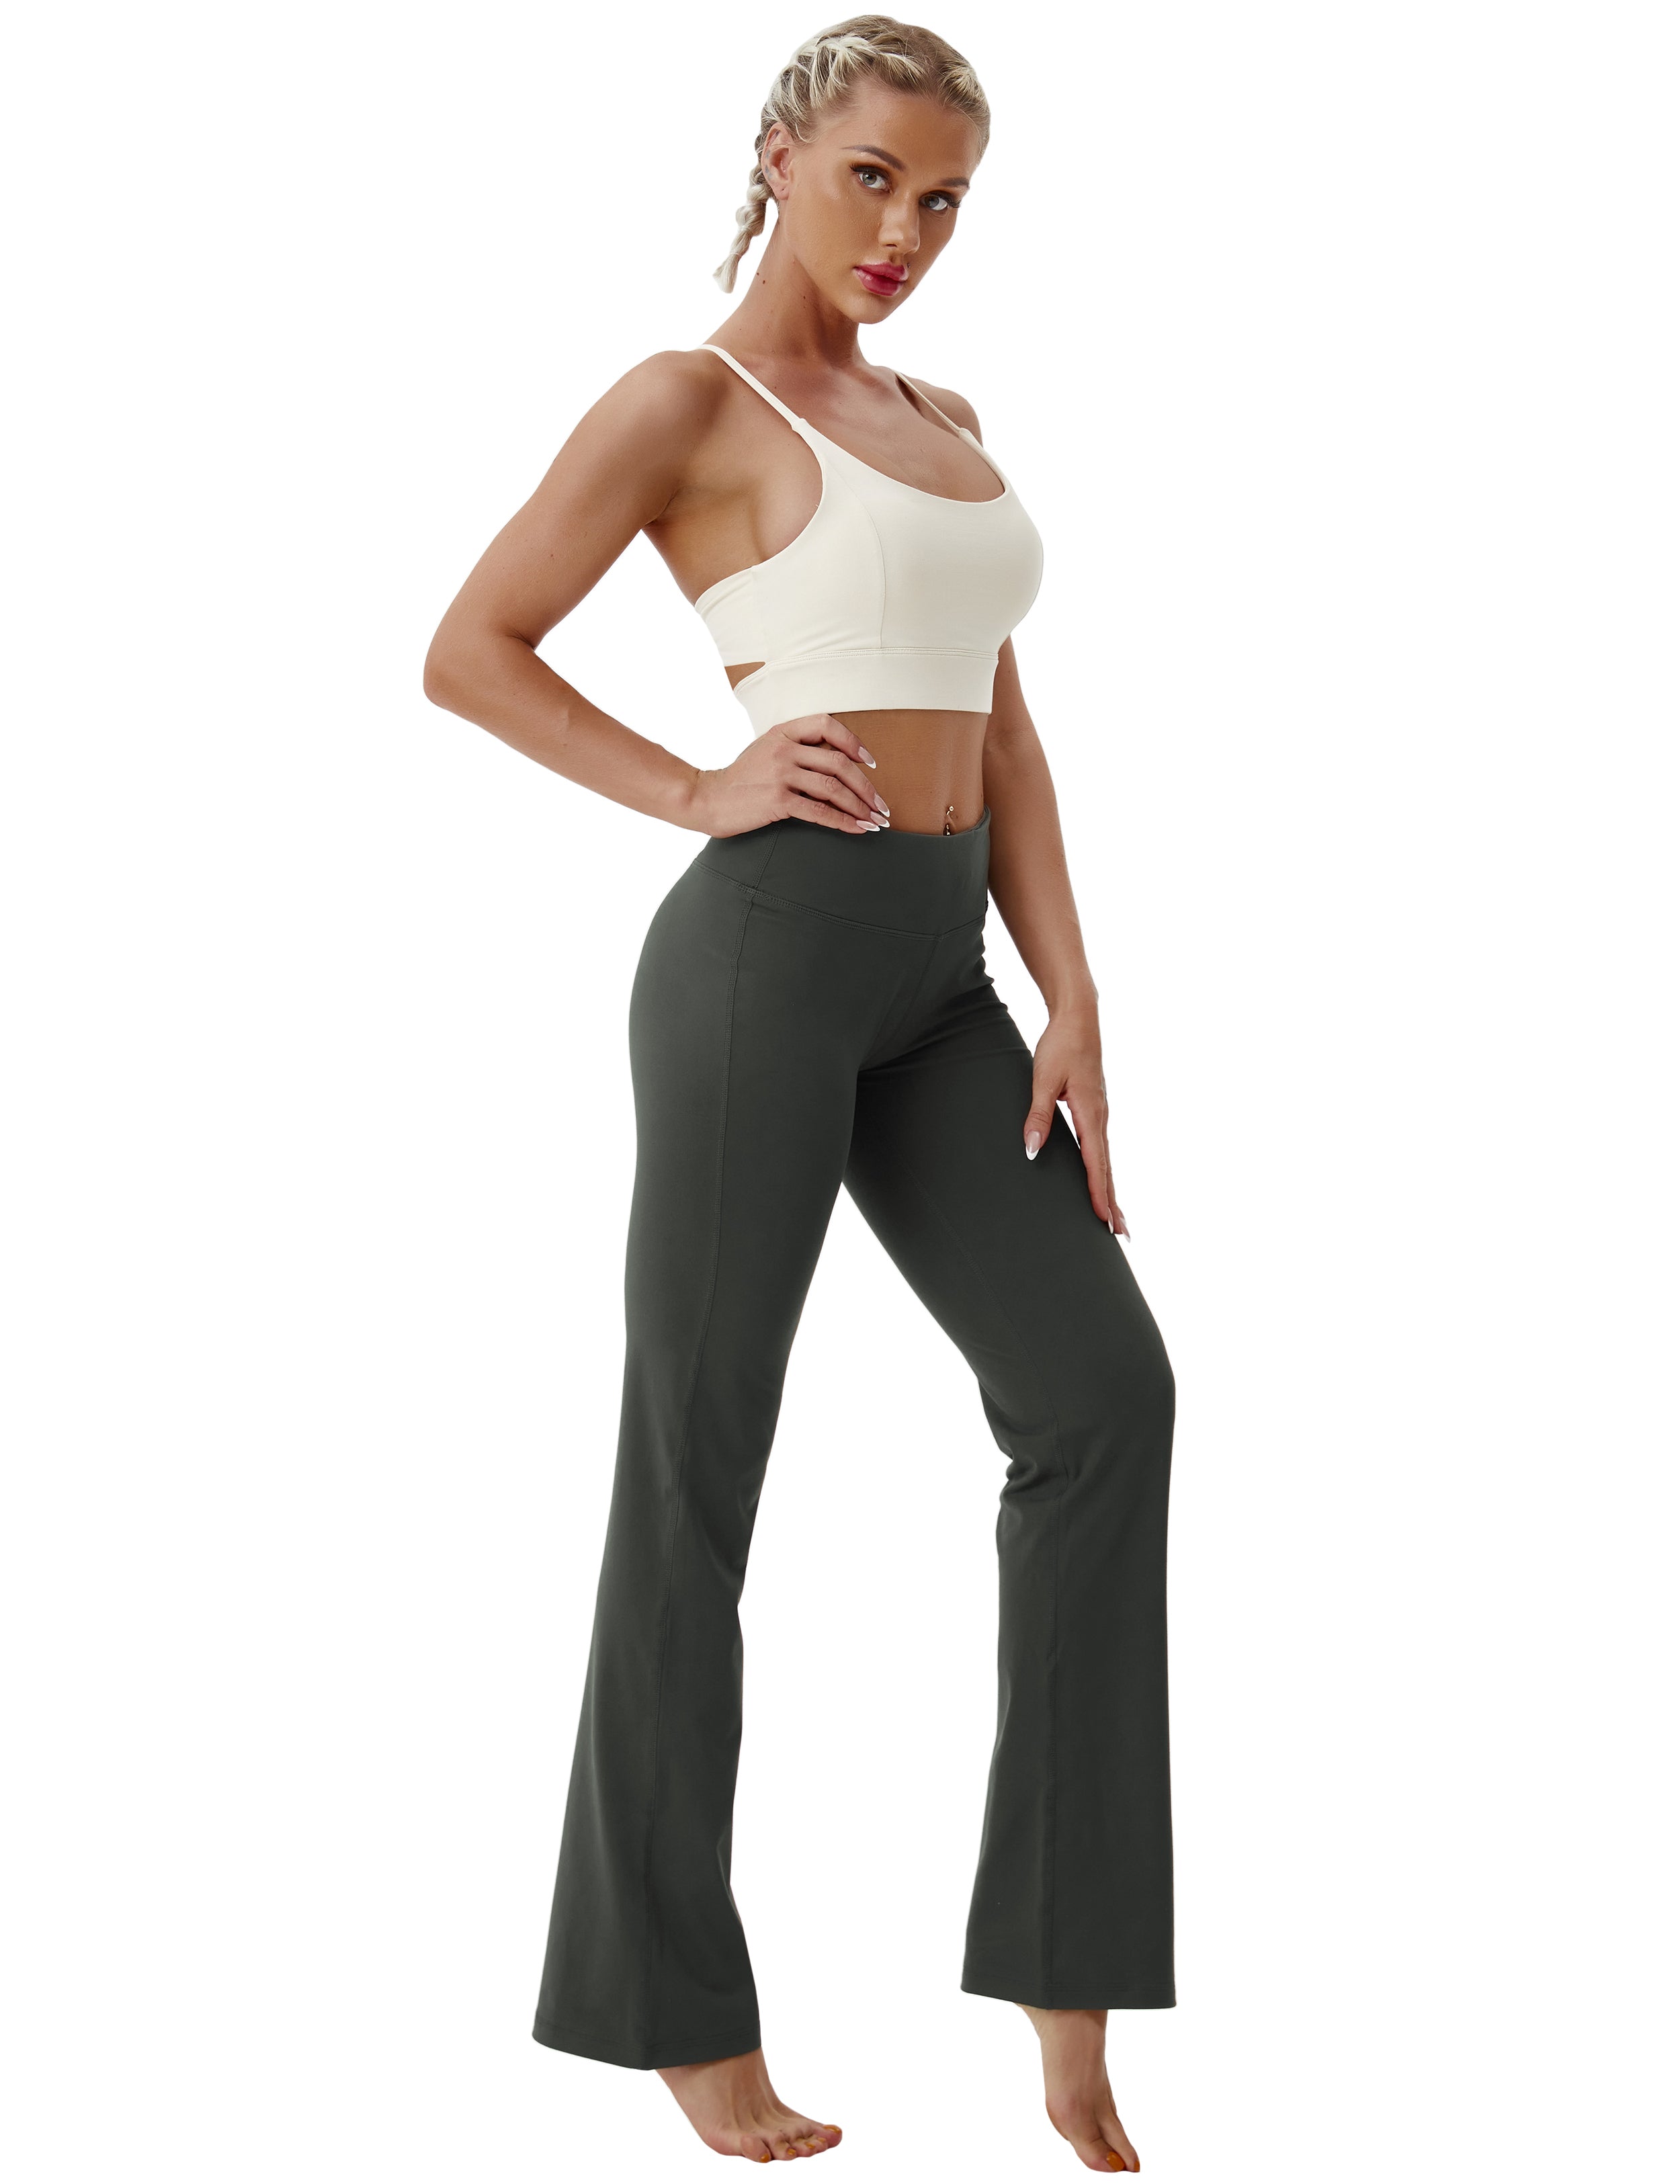 Cotton Nylon Bootcut Leggings olivegray 87%Nylon/13%Spandex (Super soft, cotton feel , 280gsm) Fabric doesn't attract lint easily 4-way stretch No see-through Moisture-wicking Inner pocket Four lengths